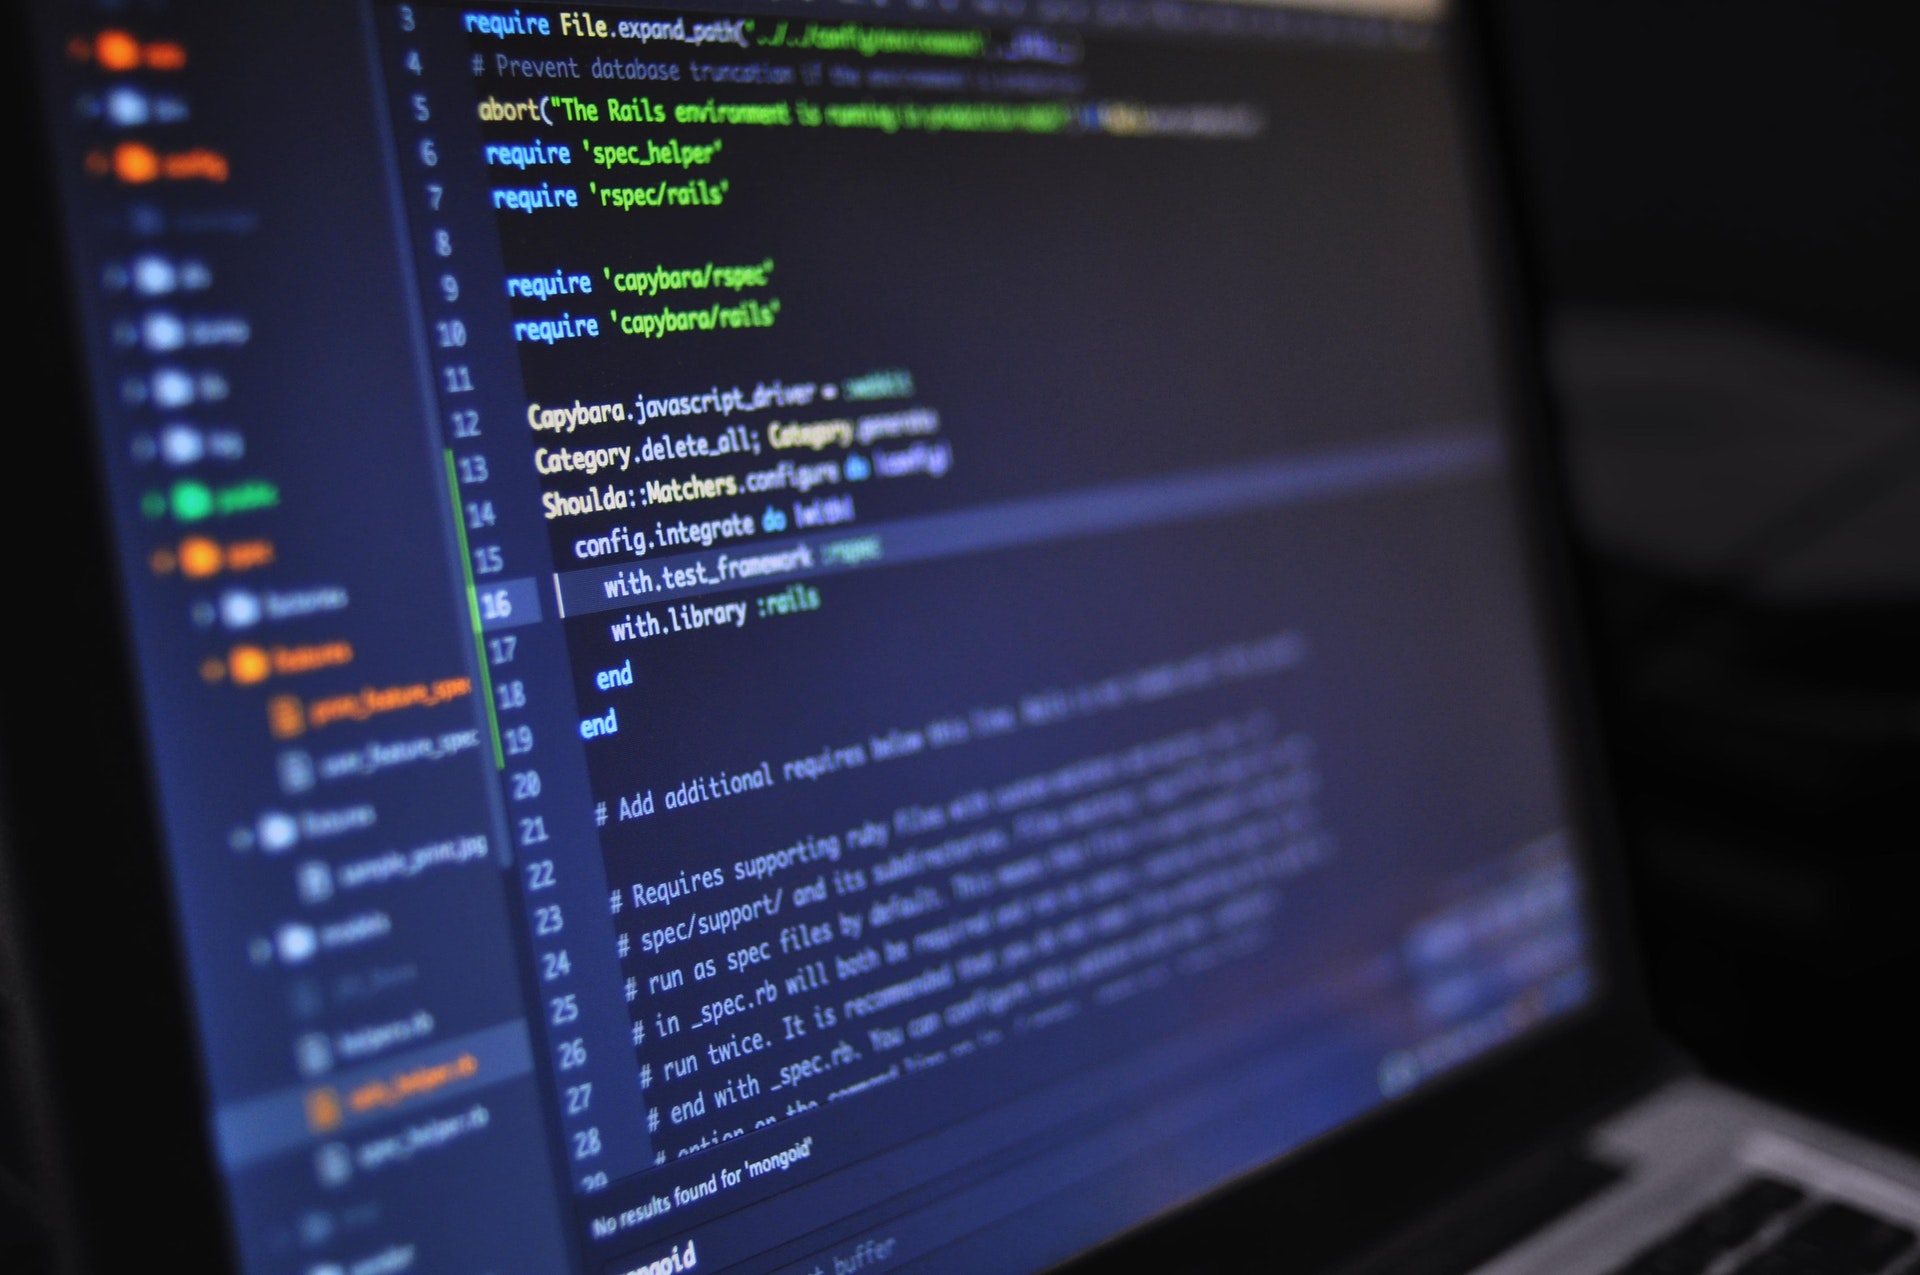 A computer screen displaying code. Photo by: Luis Gomes / Pexels.com